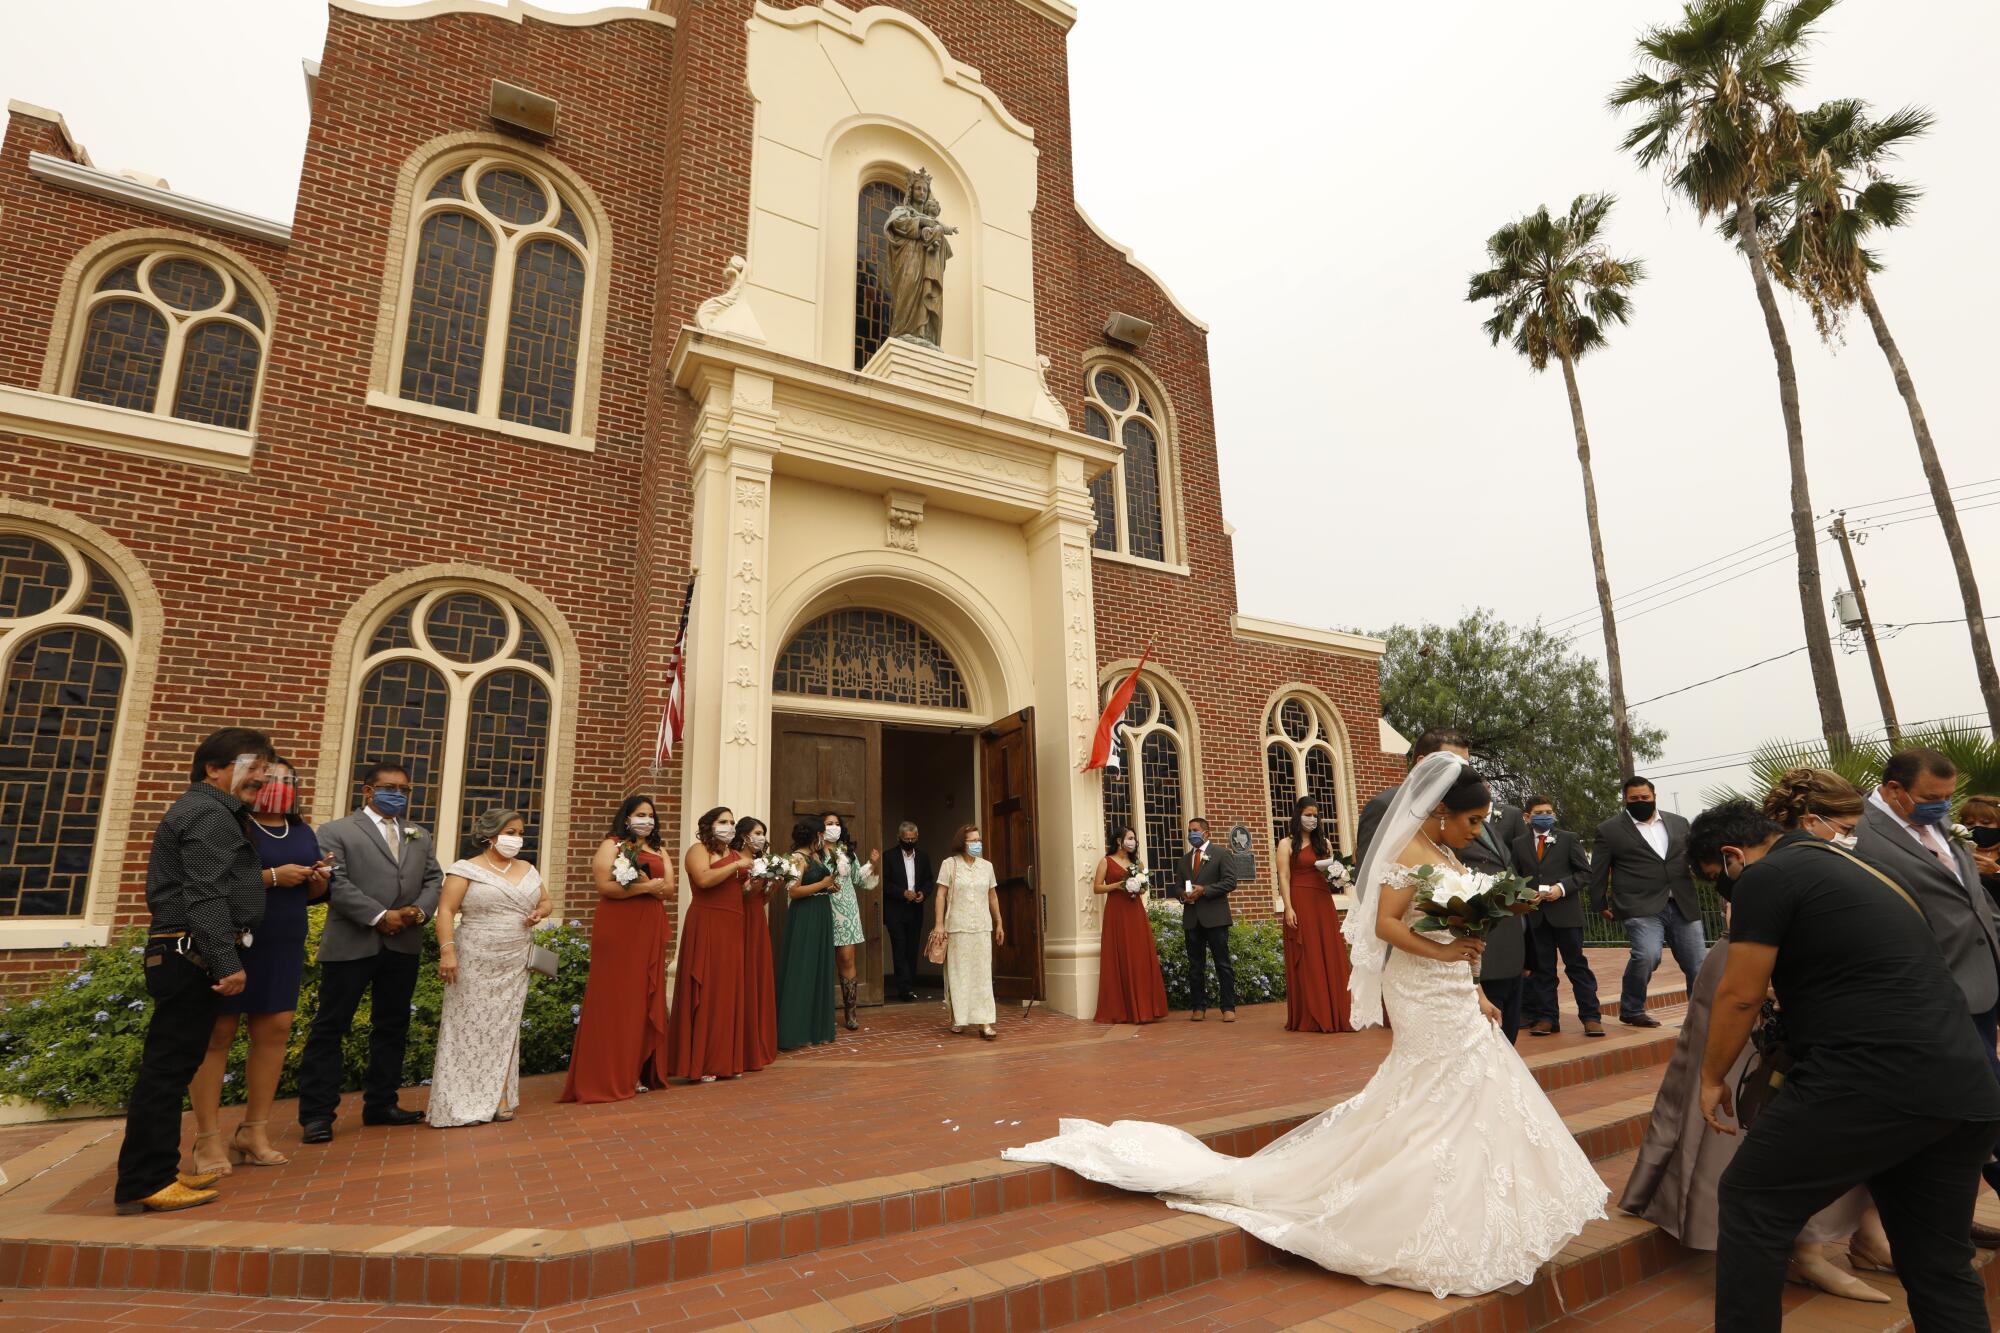 Masked guests attend a wedding at Our Lady of Guadalupe Catholic Church in Mission, Texas.